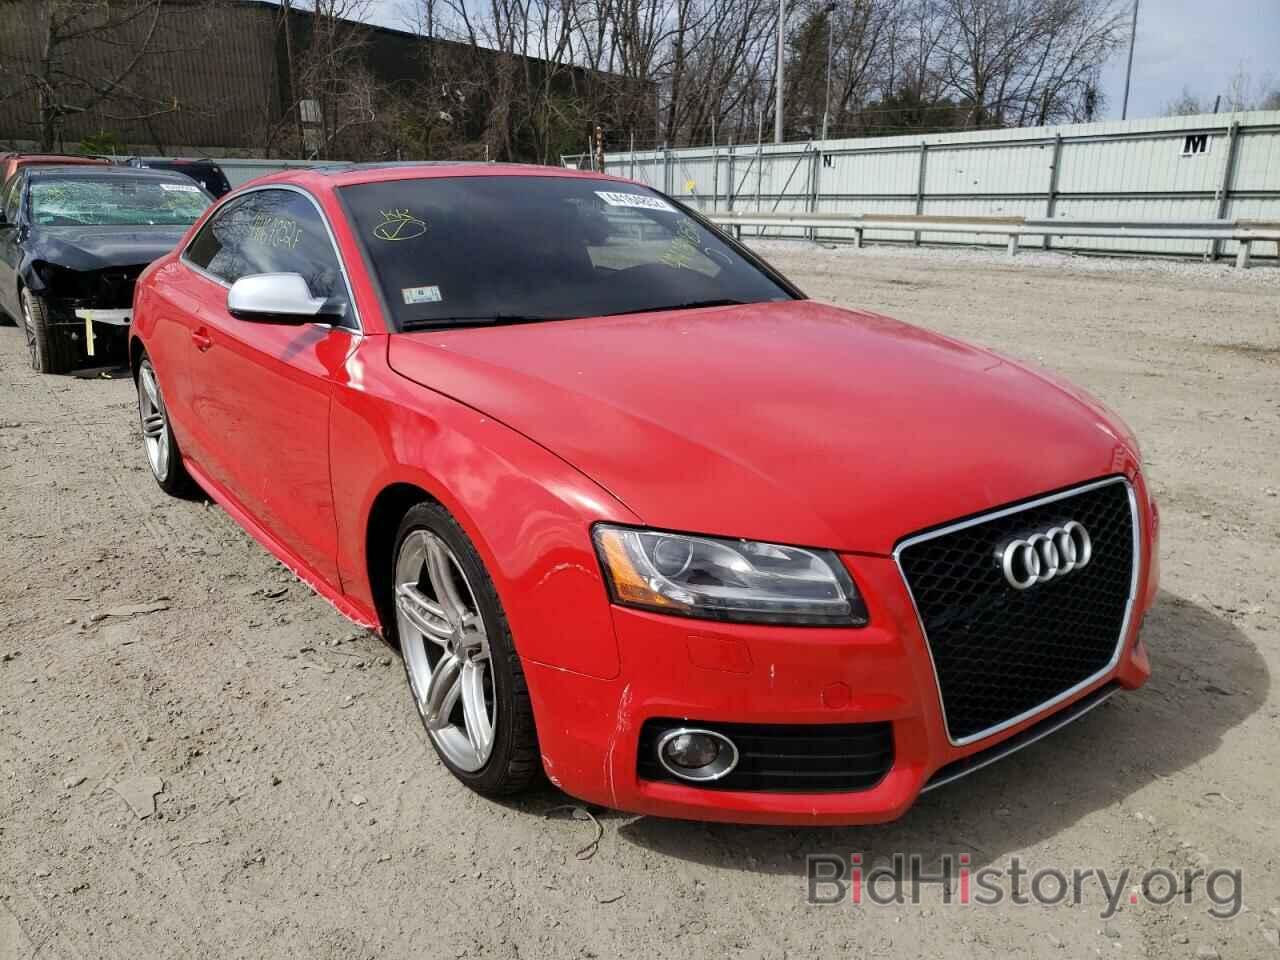 Photo WAUVVAFR3BA061436 - AUDI S5/RS5 2011